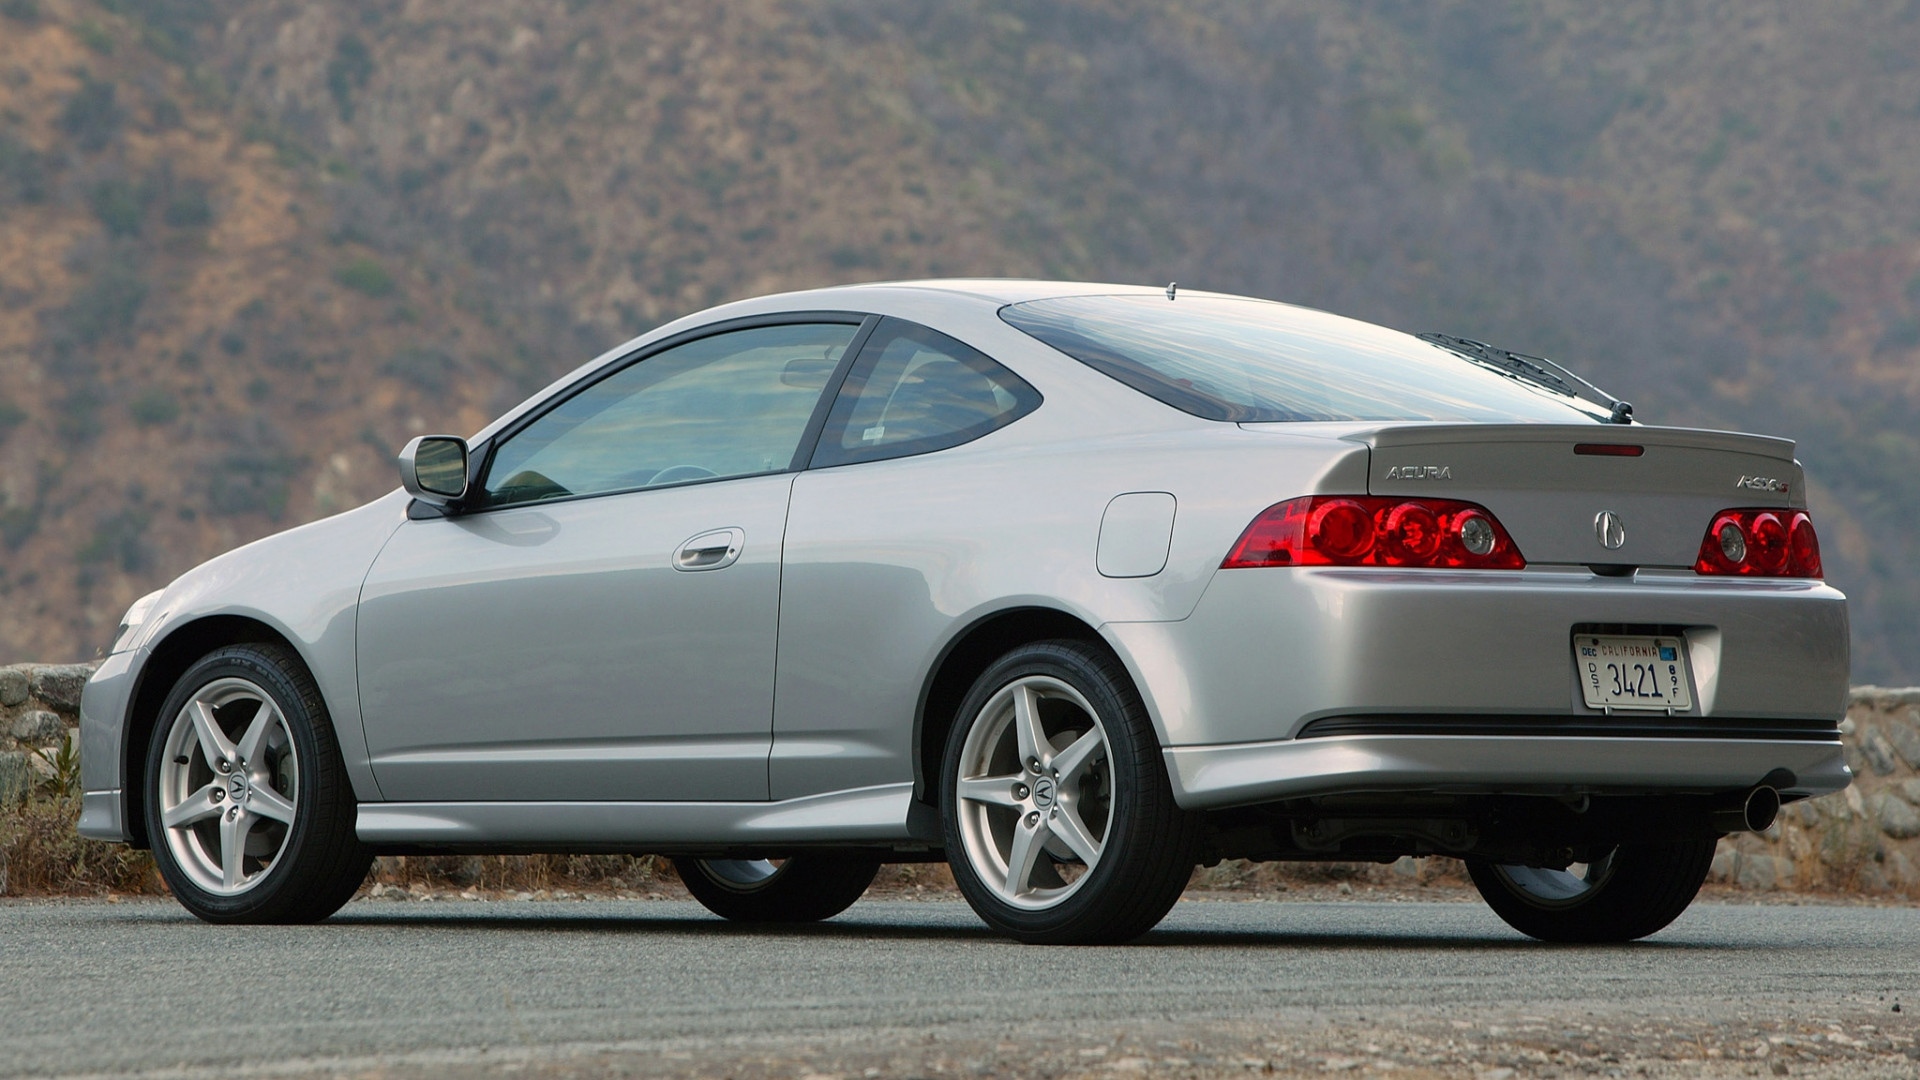 1920x1080  Wallpaper acura, rsx, metallic gray, side view, style, cars,